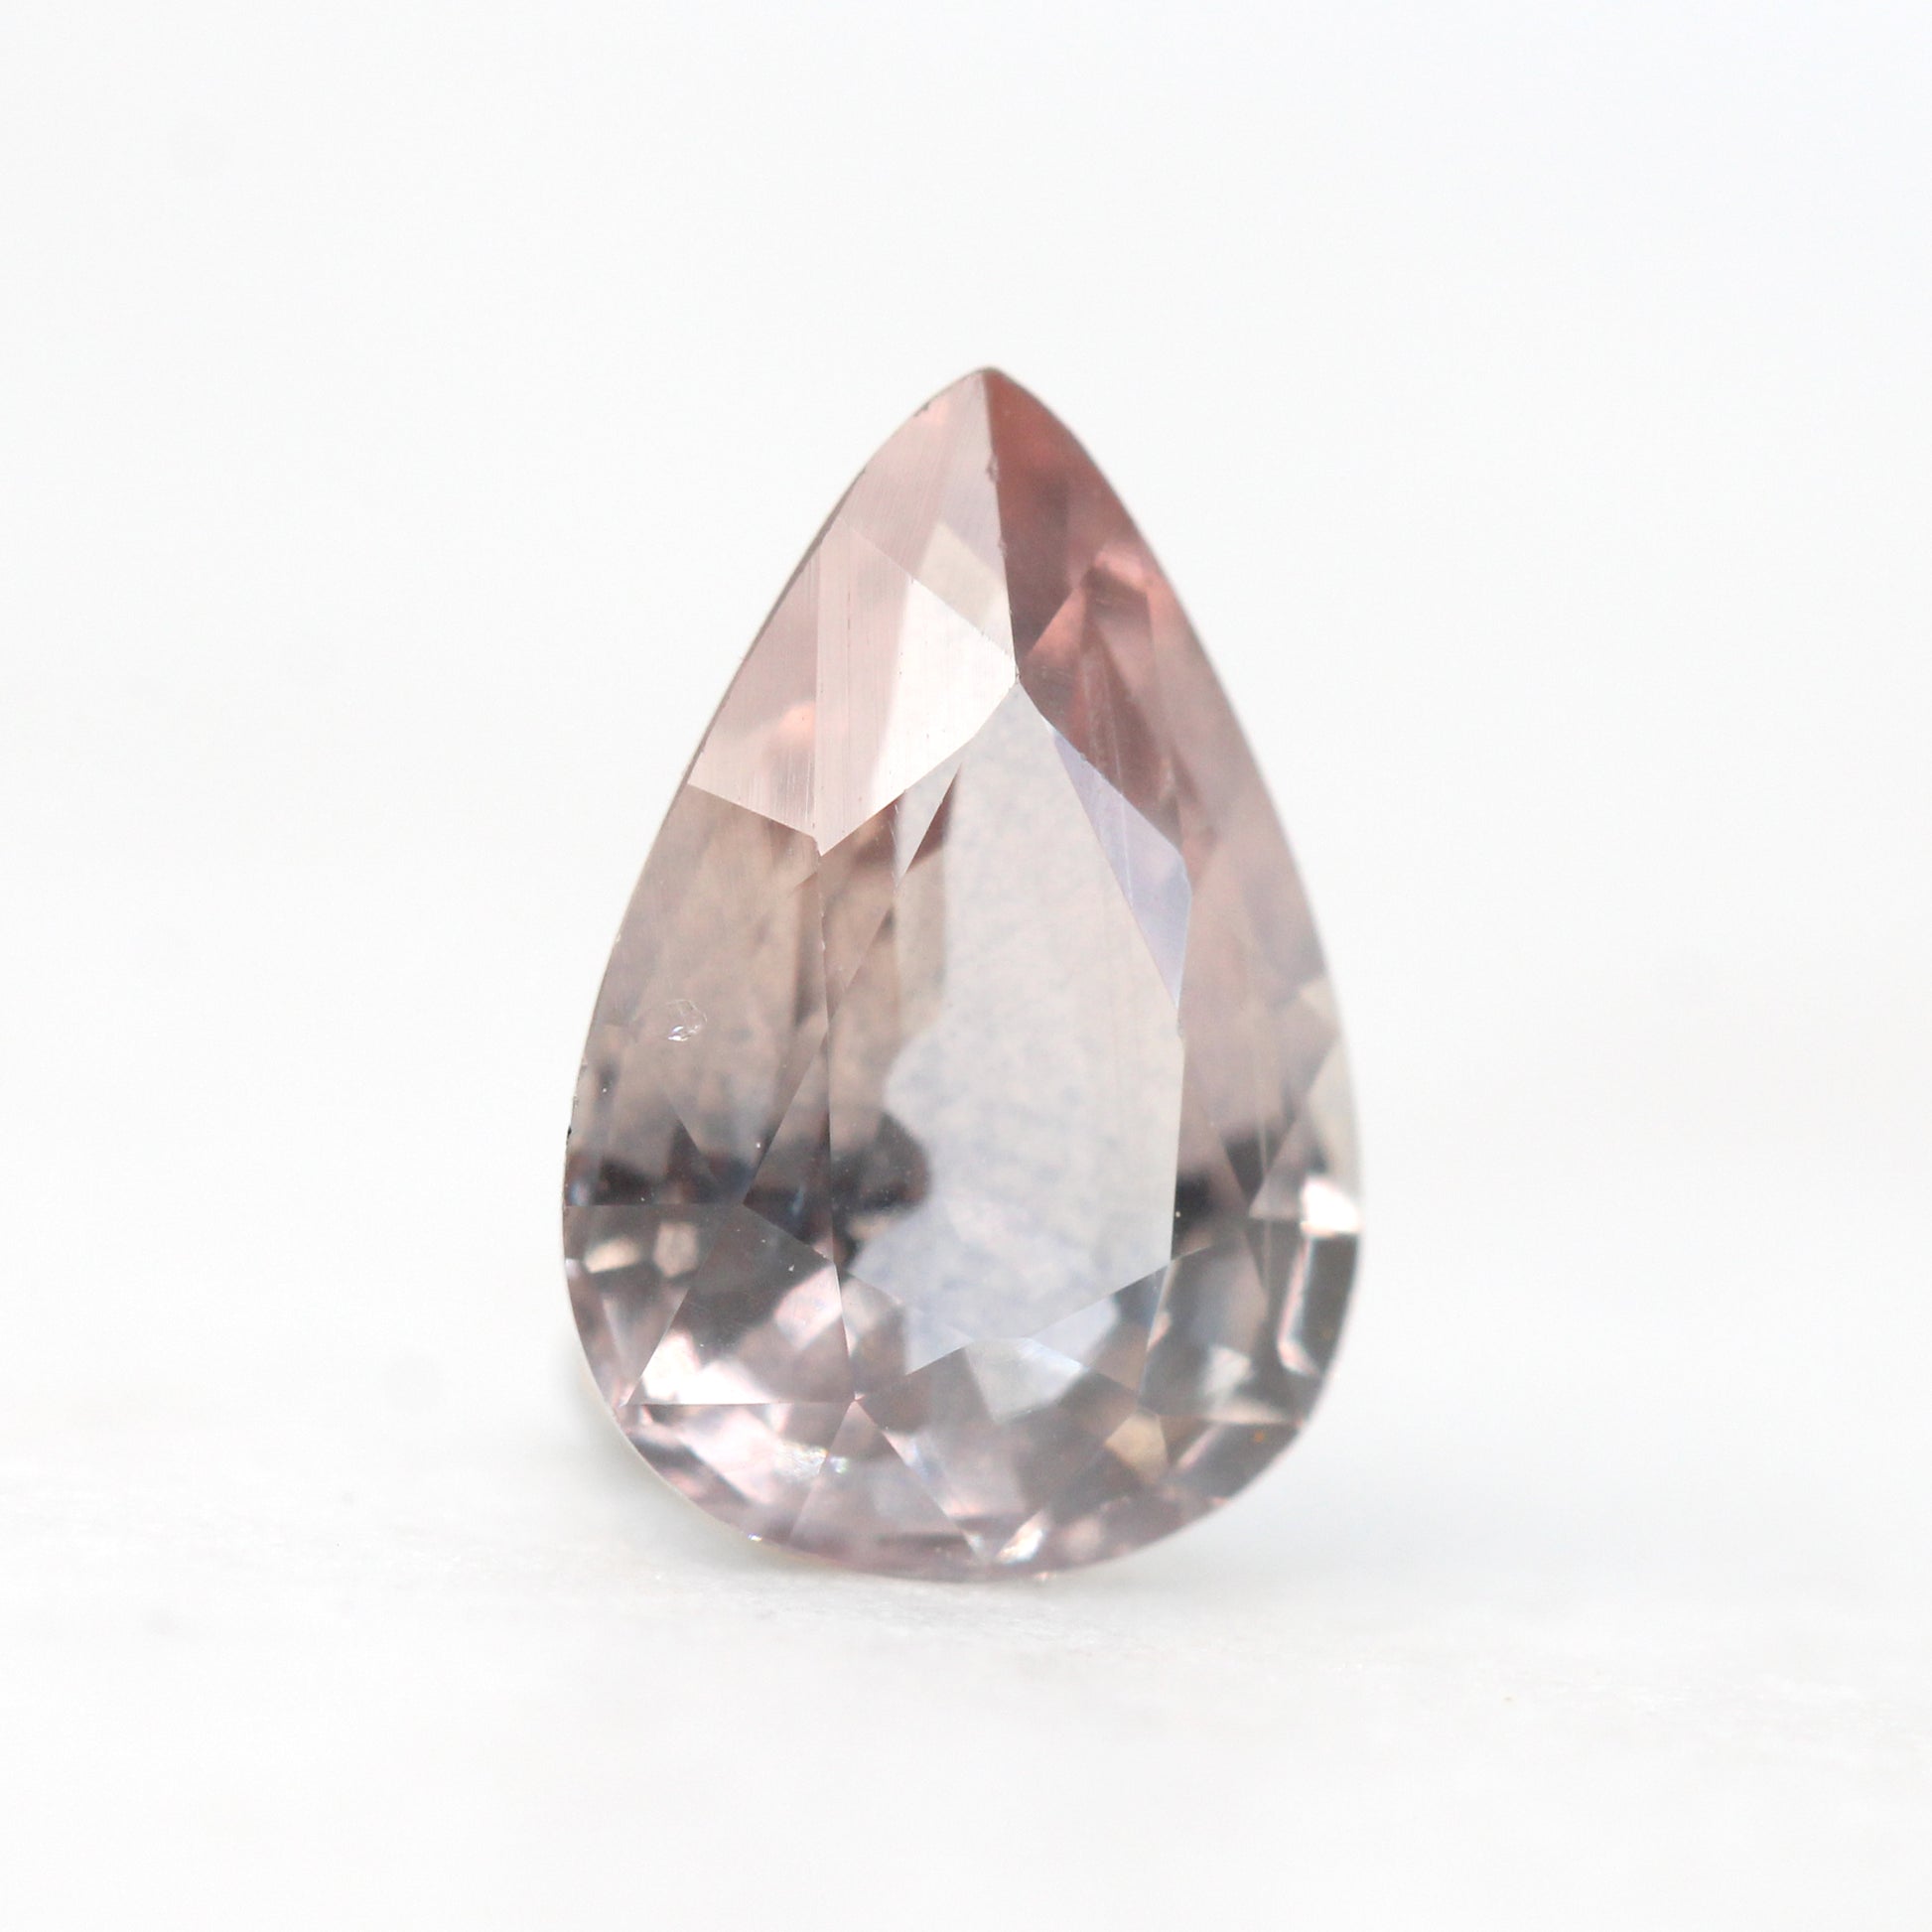 CAELEN (M) 1.30 Carat Clear Warm Pink Pear Sapphire for Custom Work - Inventory Code PPS130 - Midwinter Co. Alternative Bridal Rings and Modern Fine Jewelry